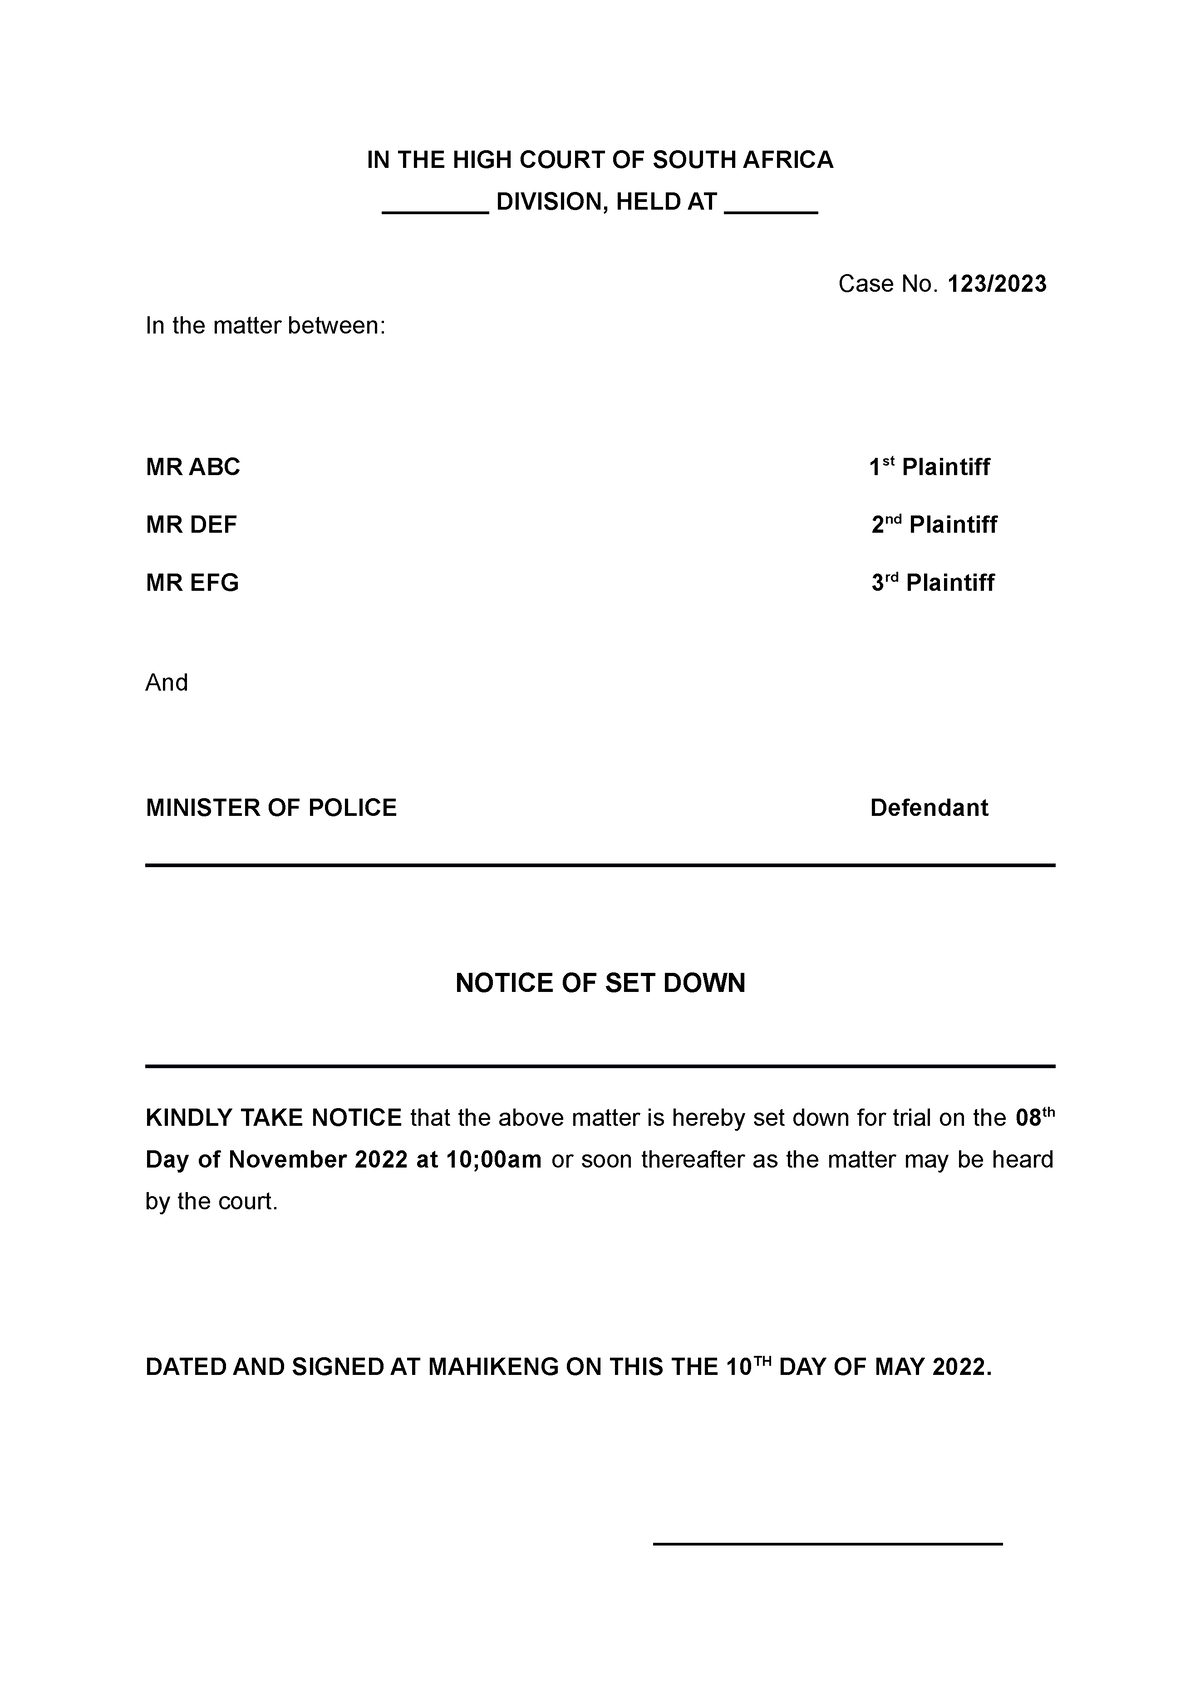 Notice OF SET DOWN IN THE HIGH COURT OF SOUTH AFRICA